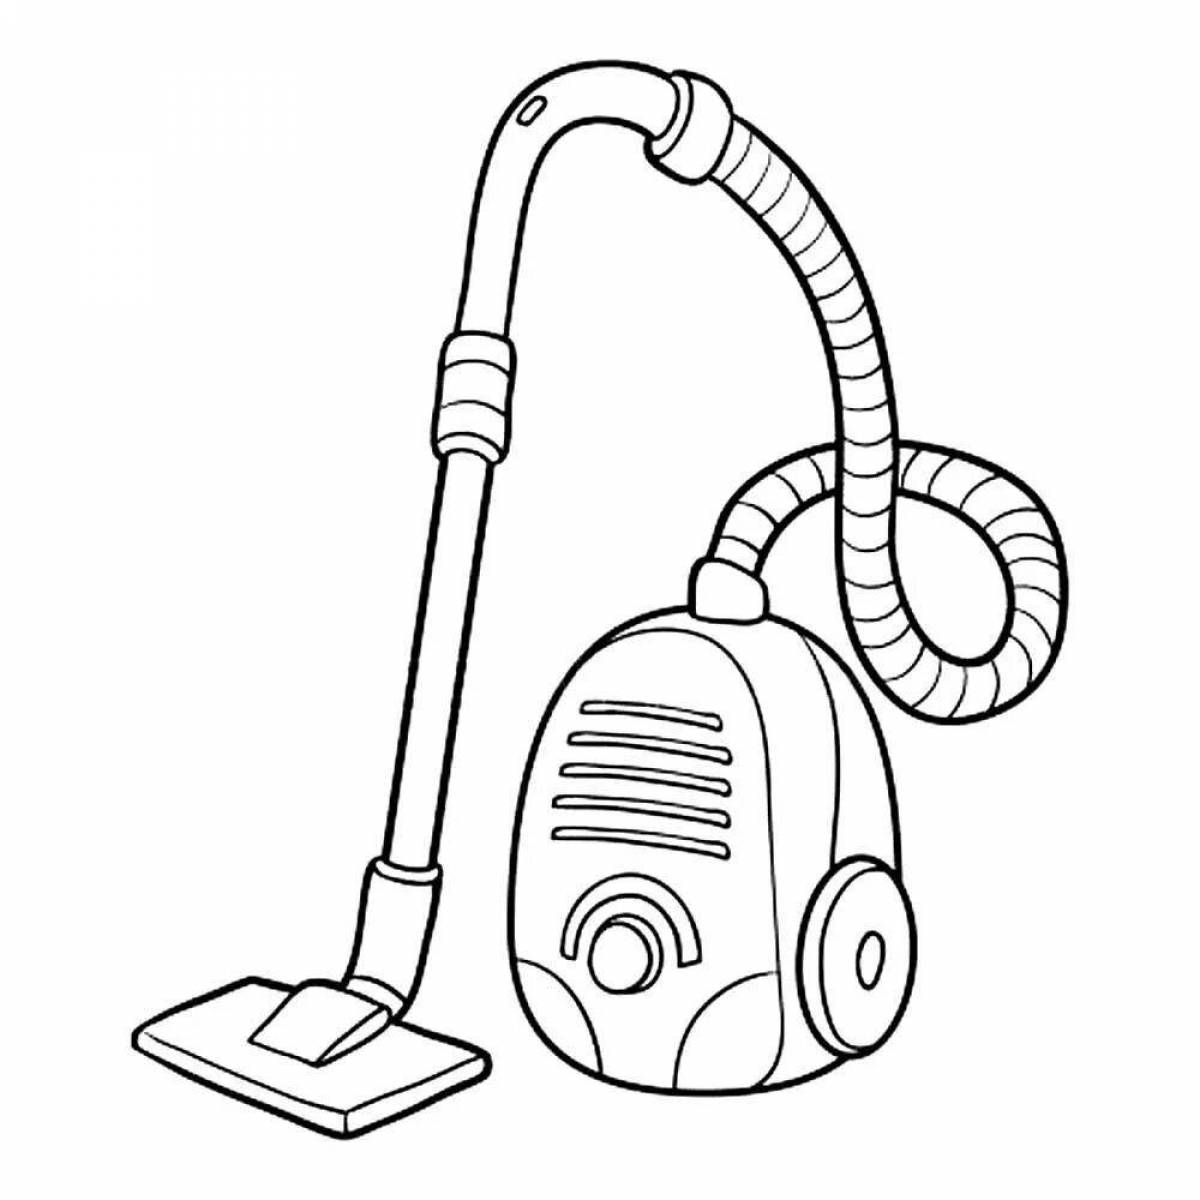 Coloring pages of household appliances for kindergarten